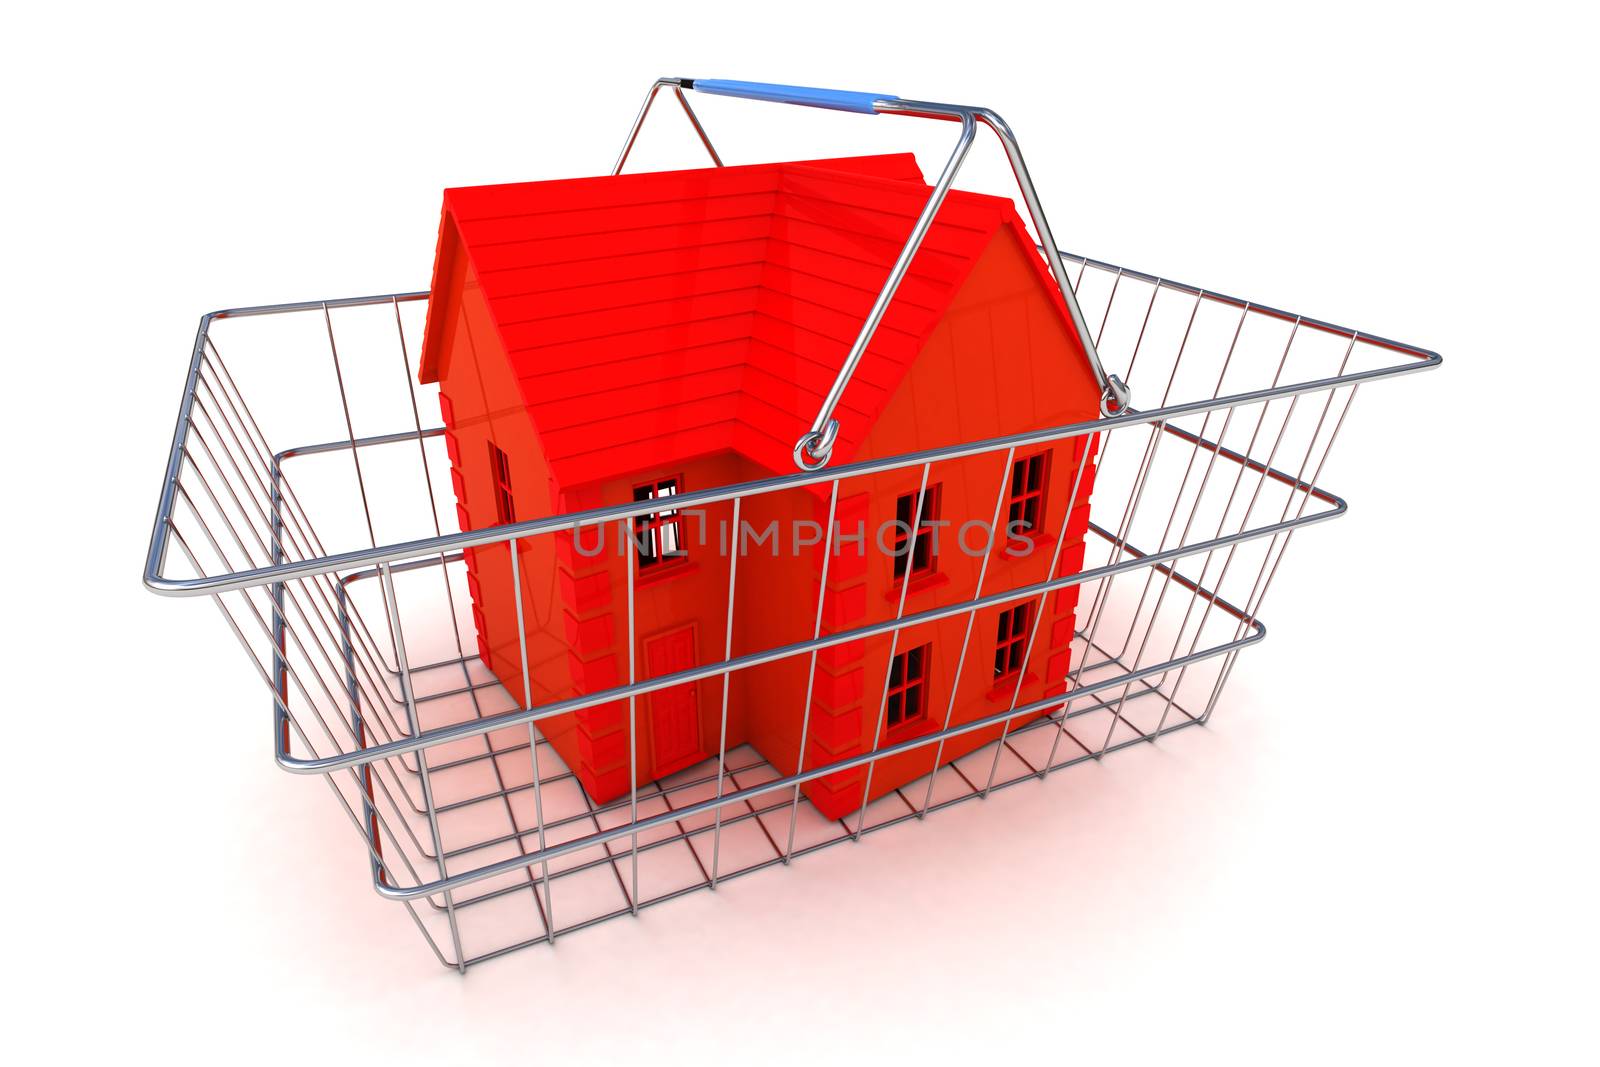 A Colourful 3d Rendered Buying a House Concept Illustration showing a Red coloured house in a shopping basket